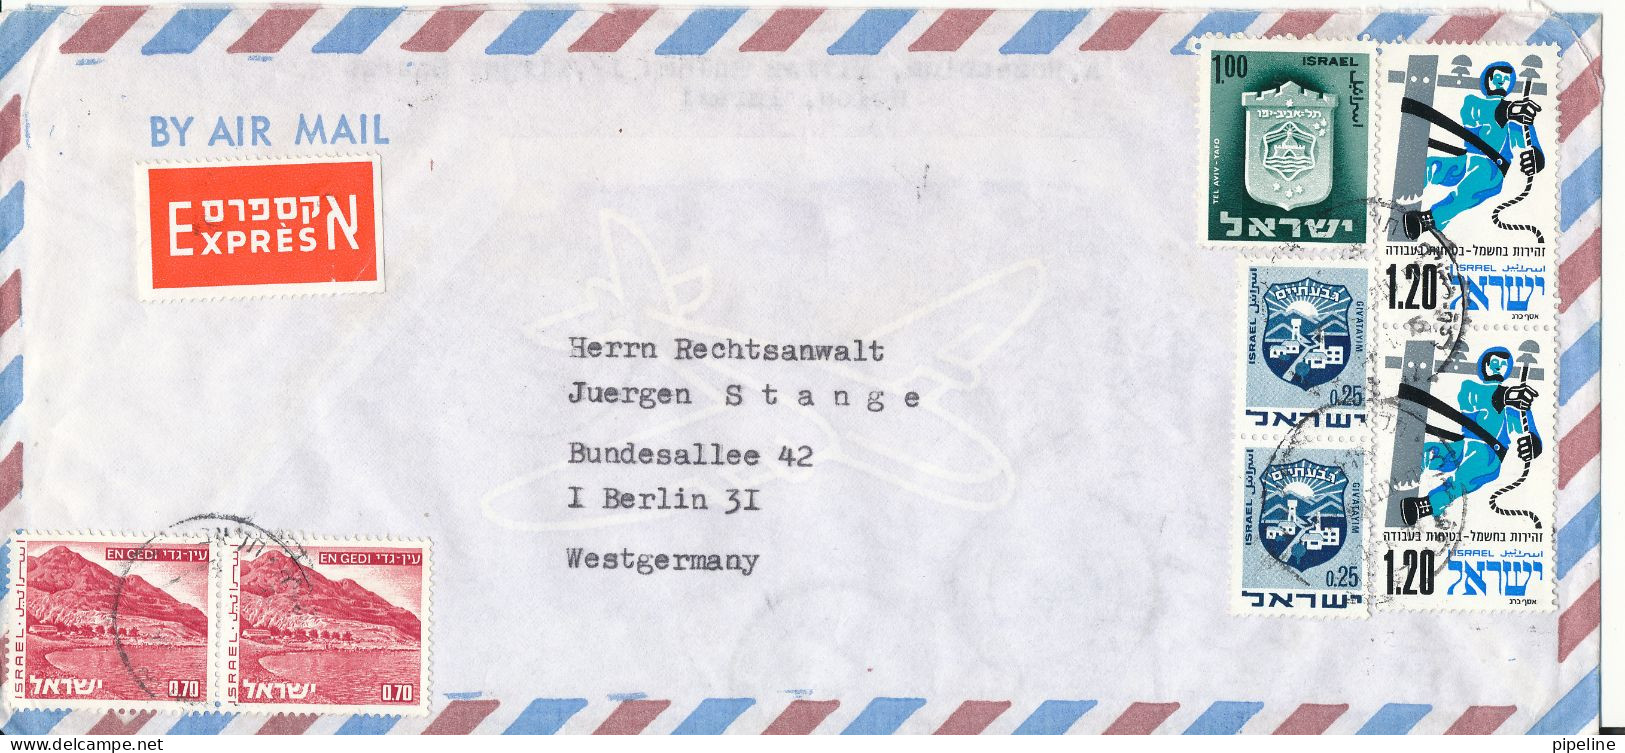 Israel  Express Air Mail Cover Sent To Germany 29-1-1975 - Poste Aérienne